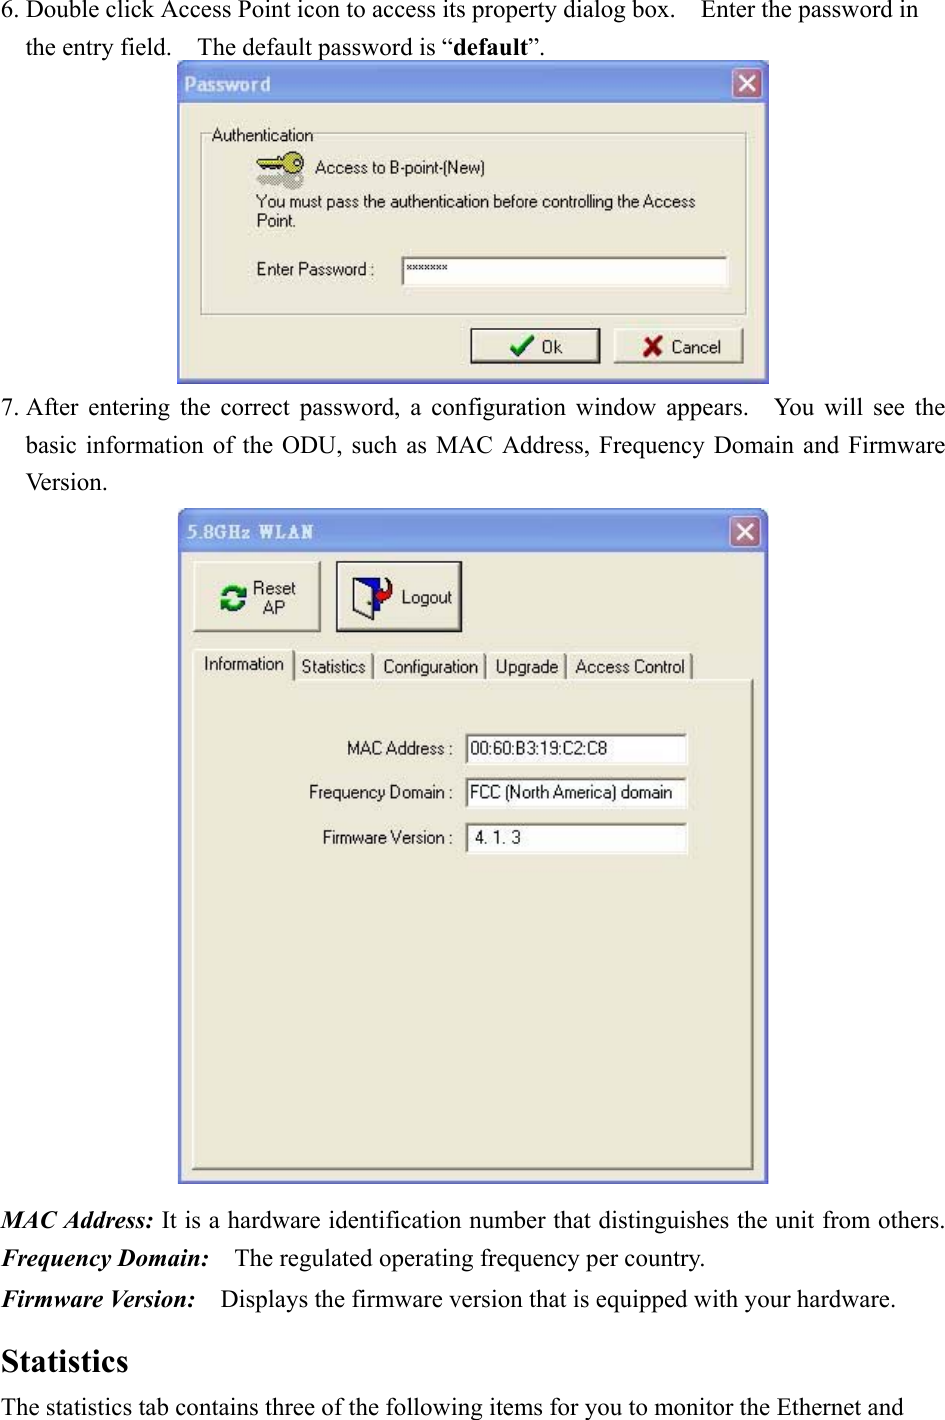 6. Double click Access Point icon to access its property dialog box.    Enter the password in the entry field.    The default password is “default”.  7. After entering the correct password, a configuration window appears.  You will see the basic information of the ODU, such as MAC Address, Frequency Domain and Firmware Version.  MAC Address: It is a hardware identification number that distinguishes the unit from others. Frequency Domain:    The regulated operating frequency per country.   Firmware Version:    Displays the firmware version that is equipped with your hardware.  Statistics The statistics tab contains three of the following items for you to monitor the Ethernet and 